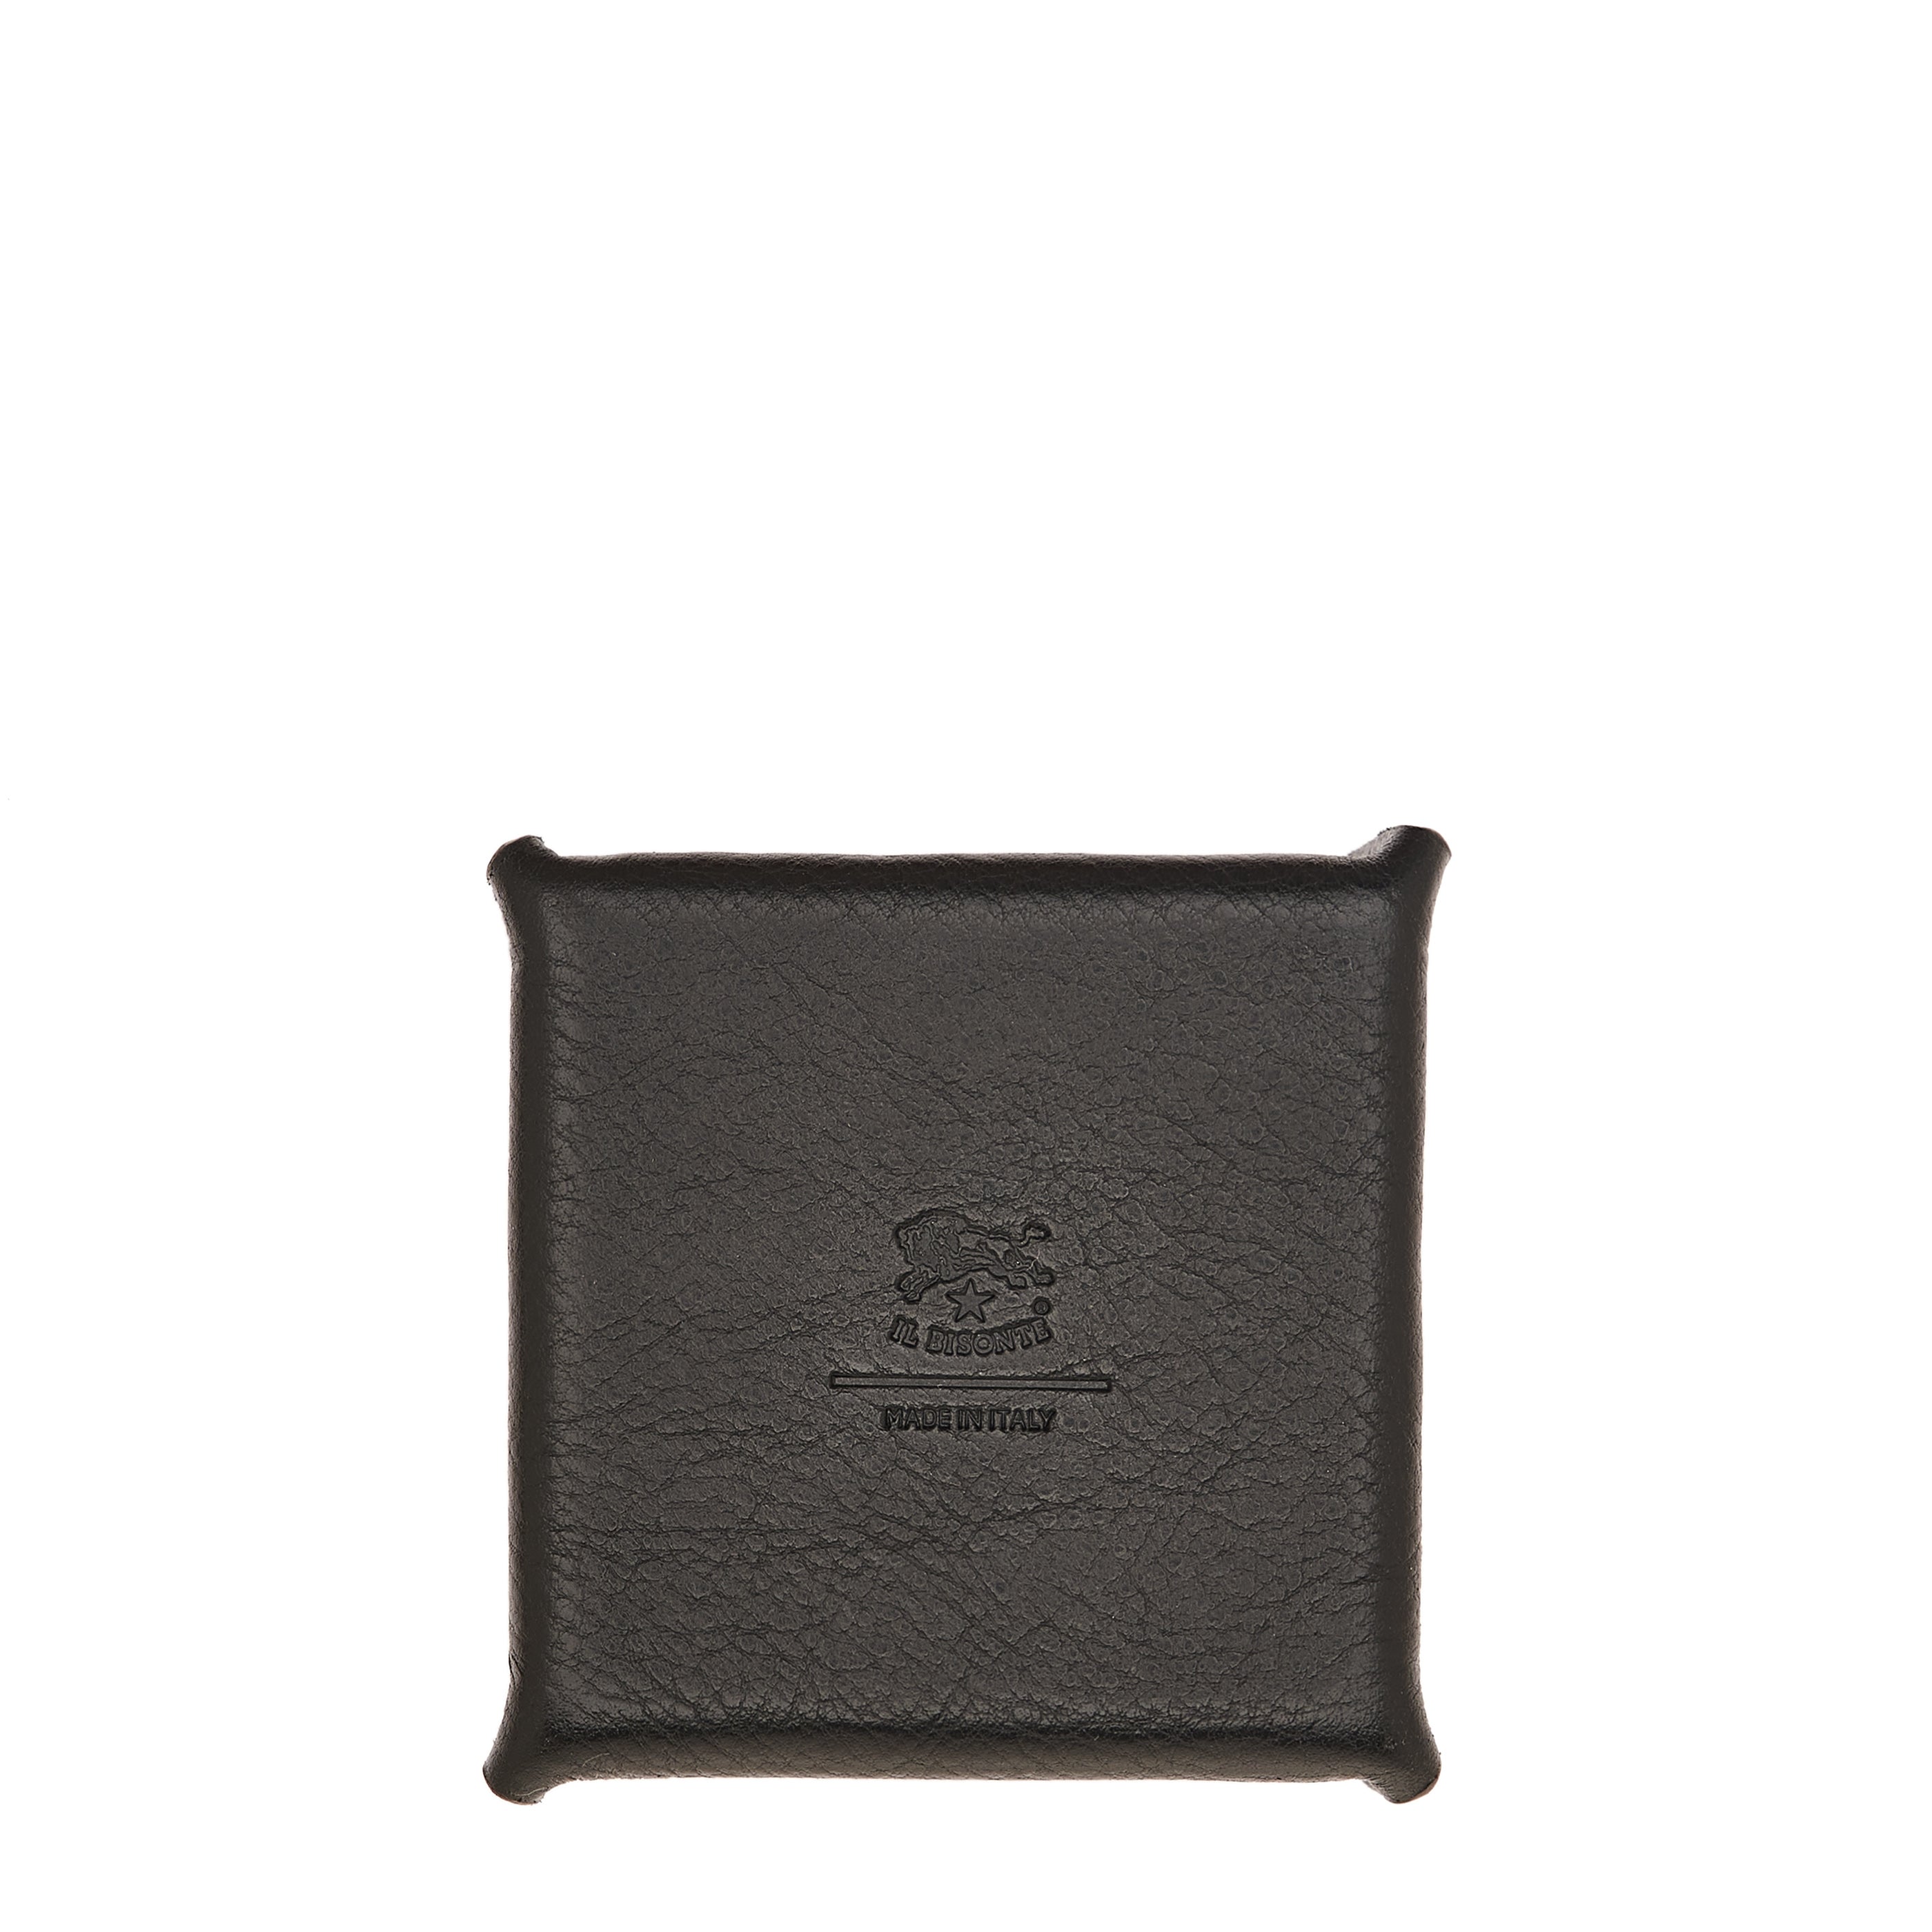 Office & business | Desk accessory in calf leather color black